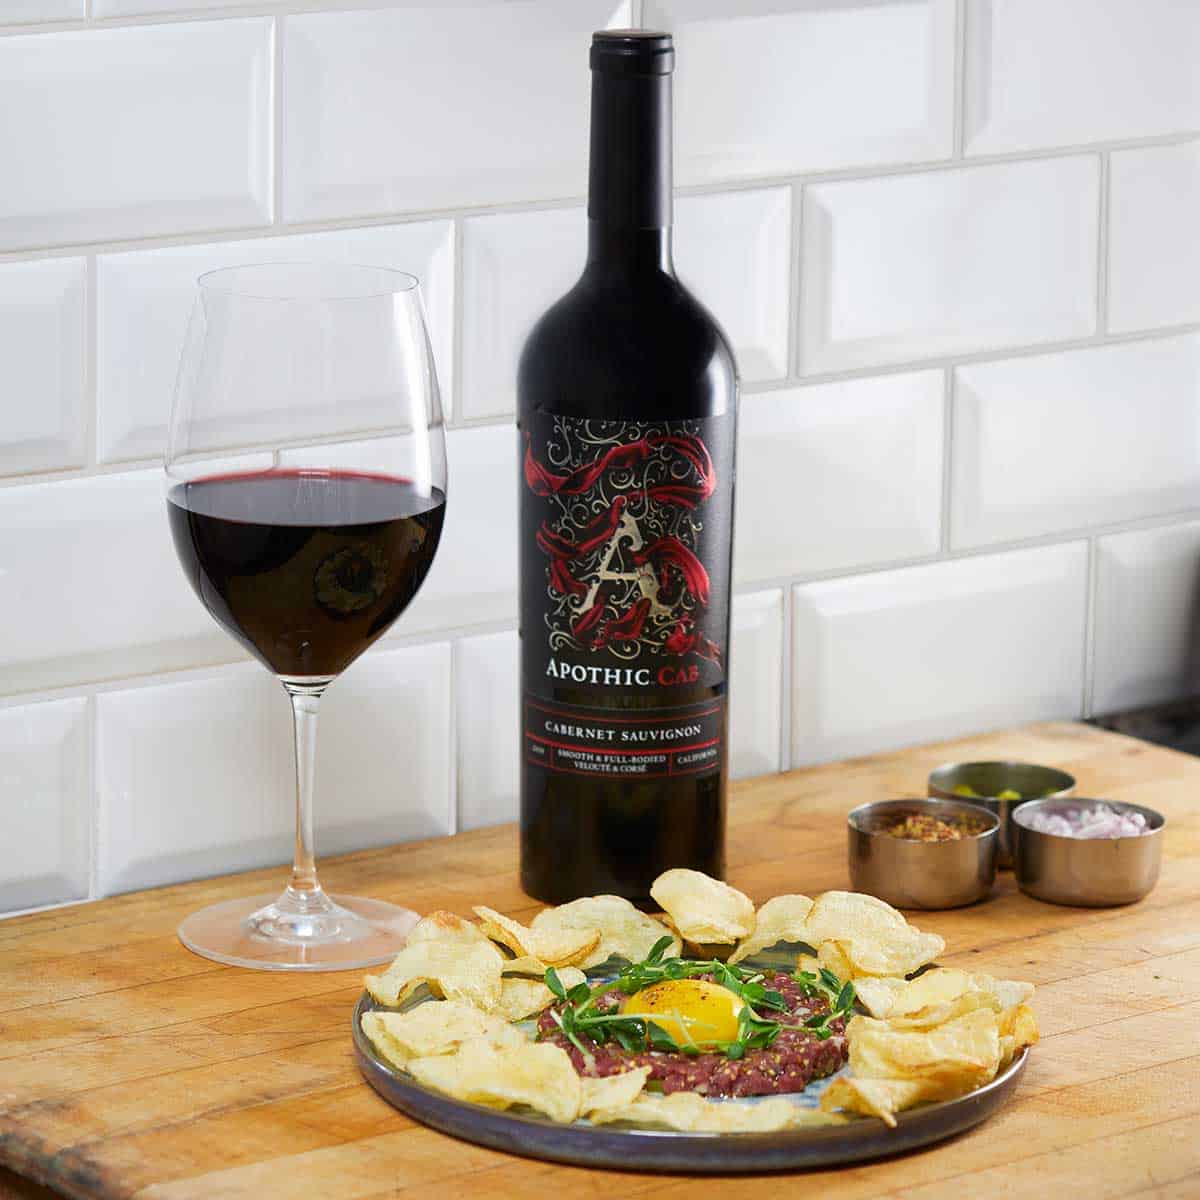 A beef tartare plate in front of a glass and a bottle of Apothic Cab